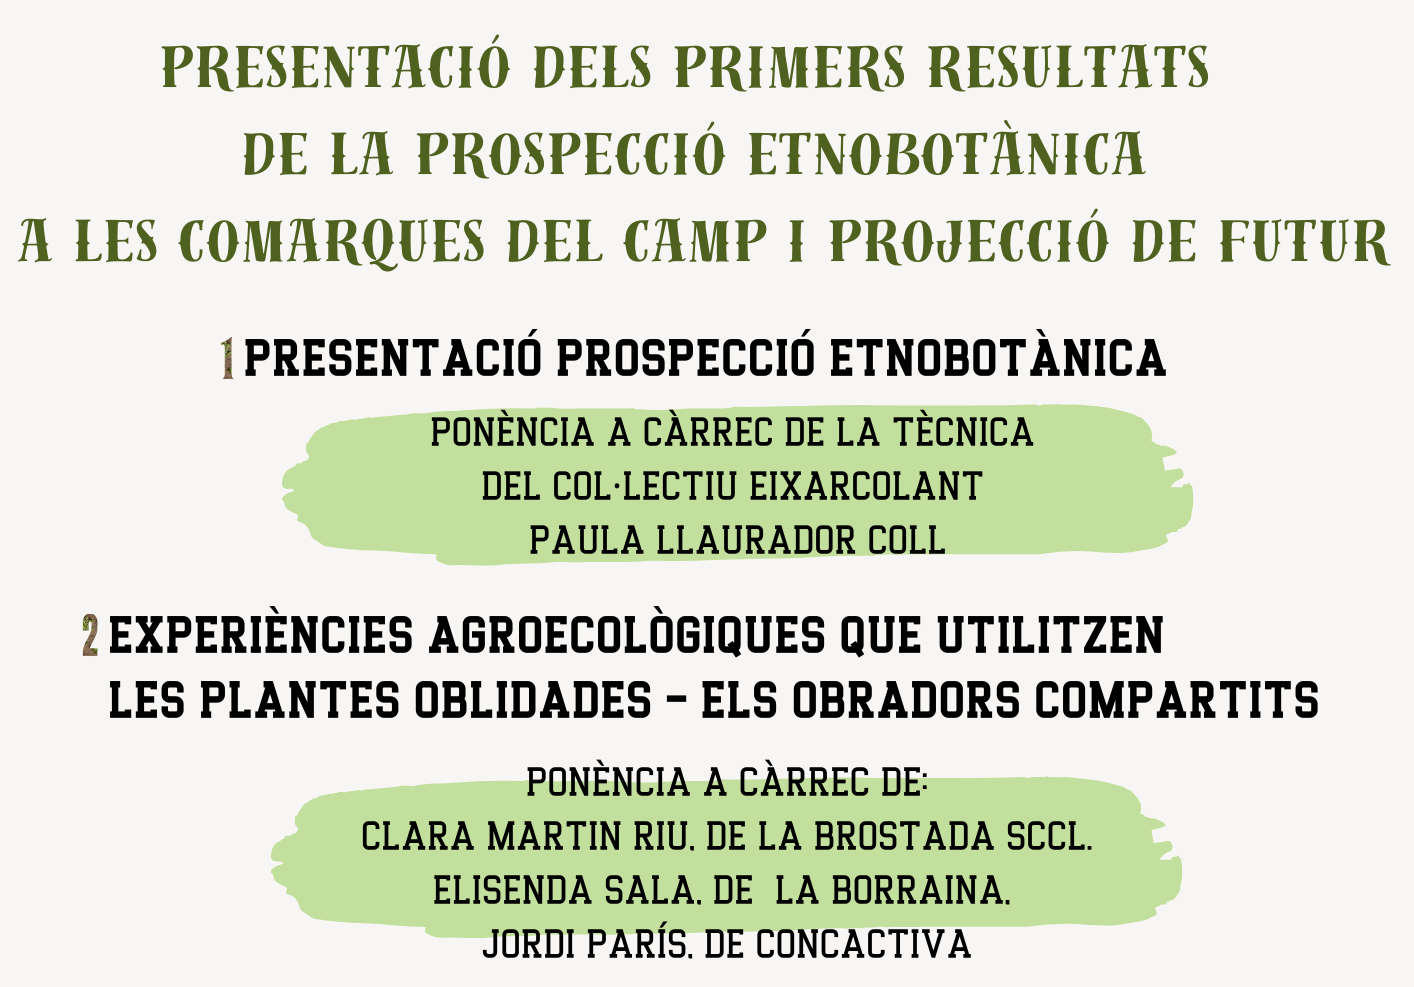 The Communalitat Reus Sud website presents the first results of an ethnobotanical survey in the camp |  All 21